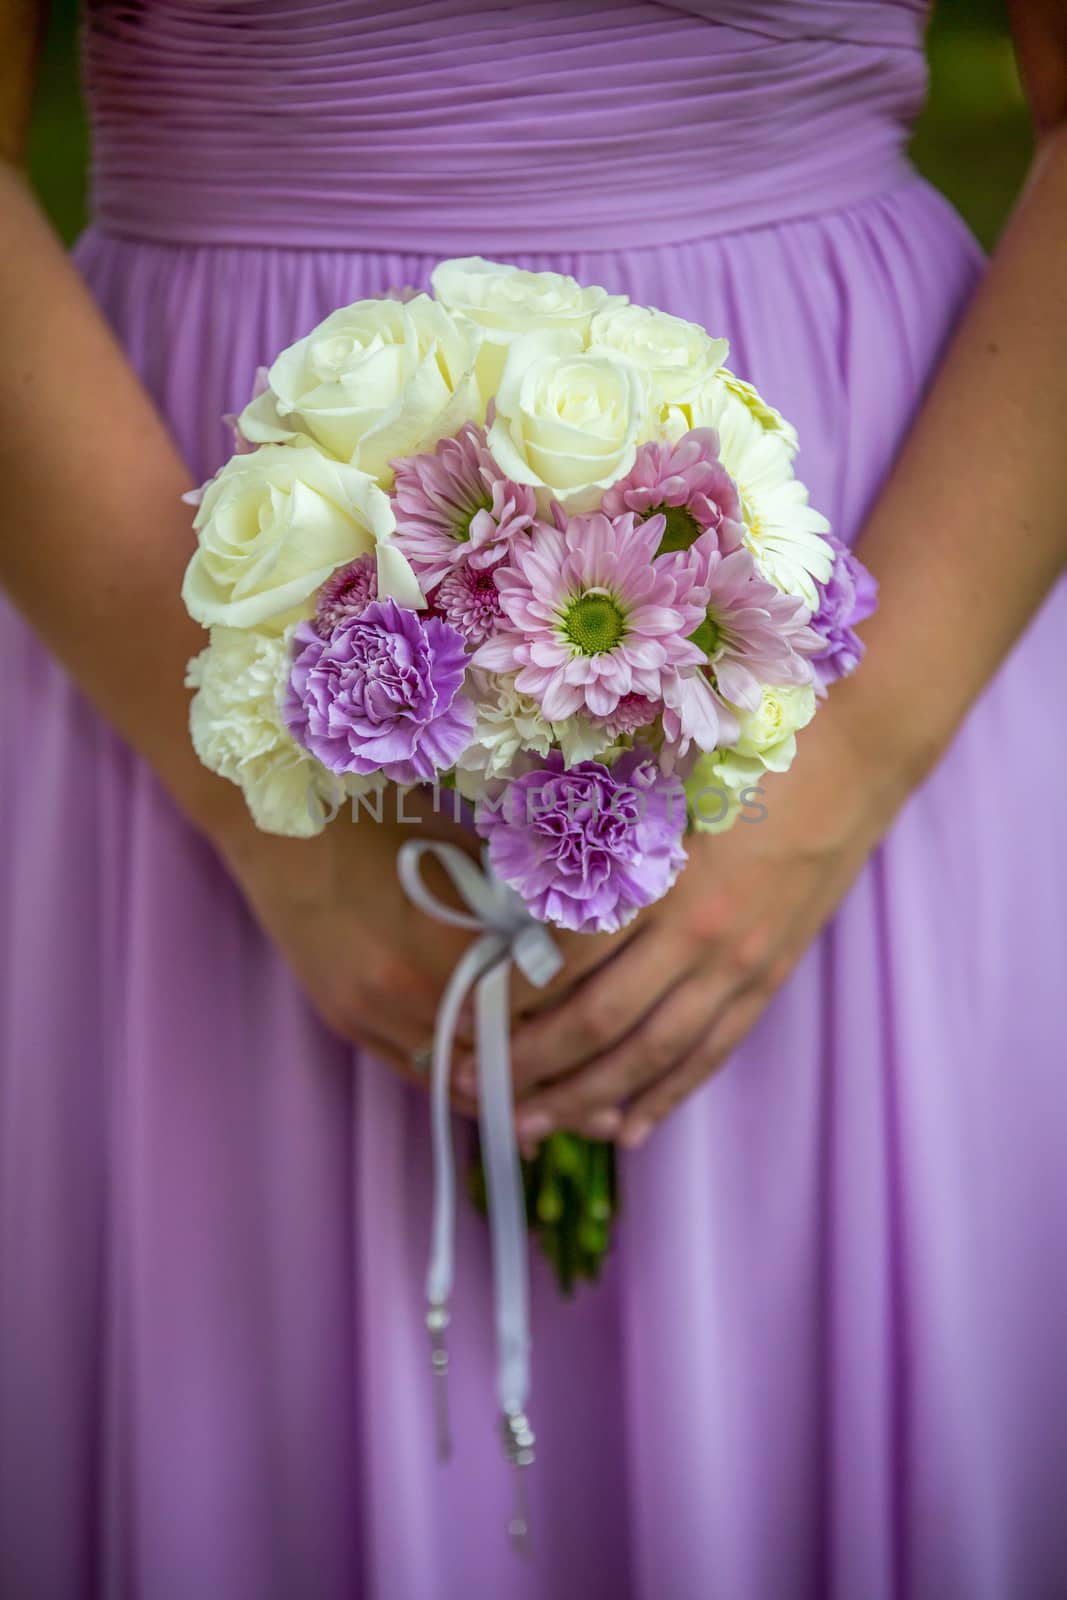 Beautiful floral bouquet being held by bridesmaid in a purple dr by salejandro